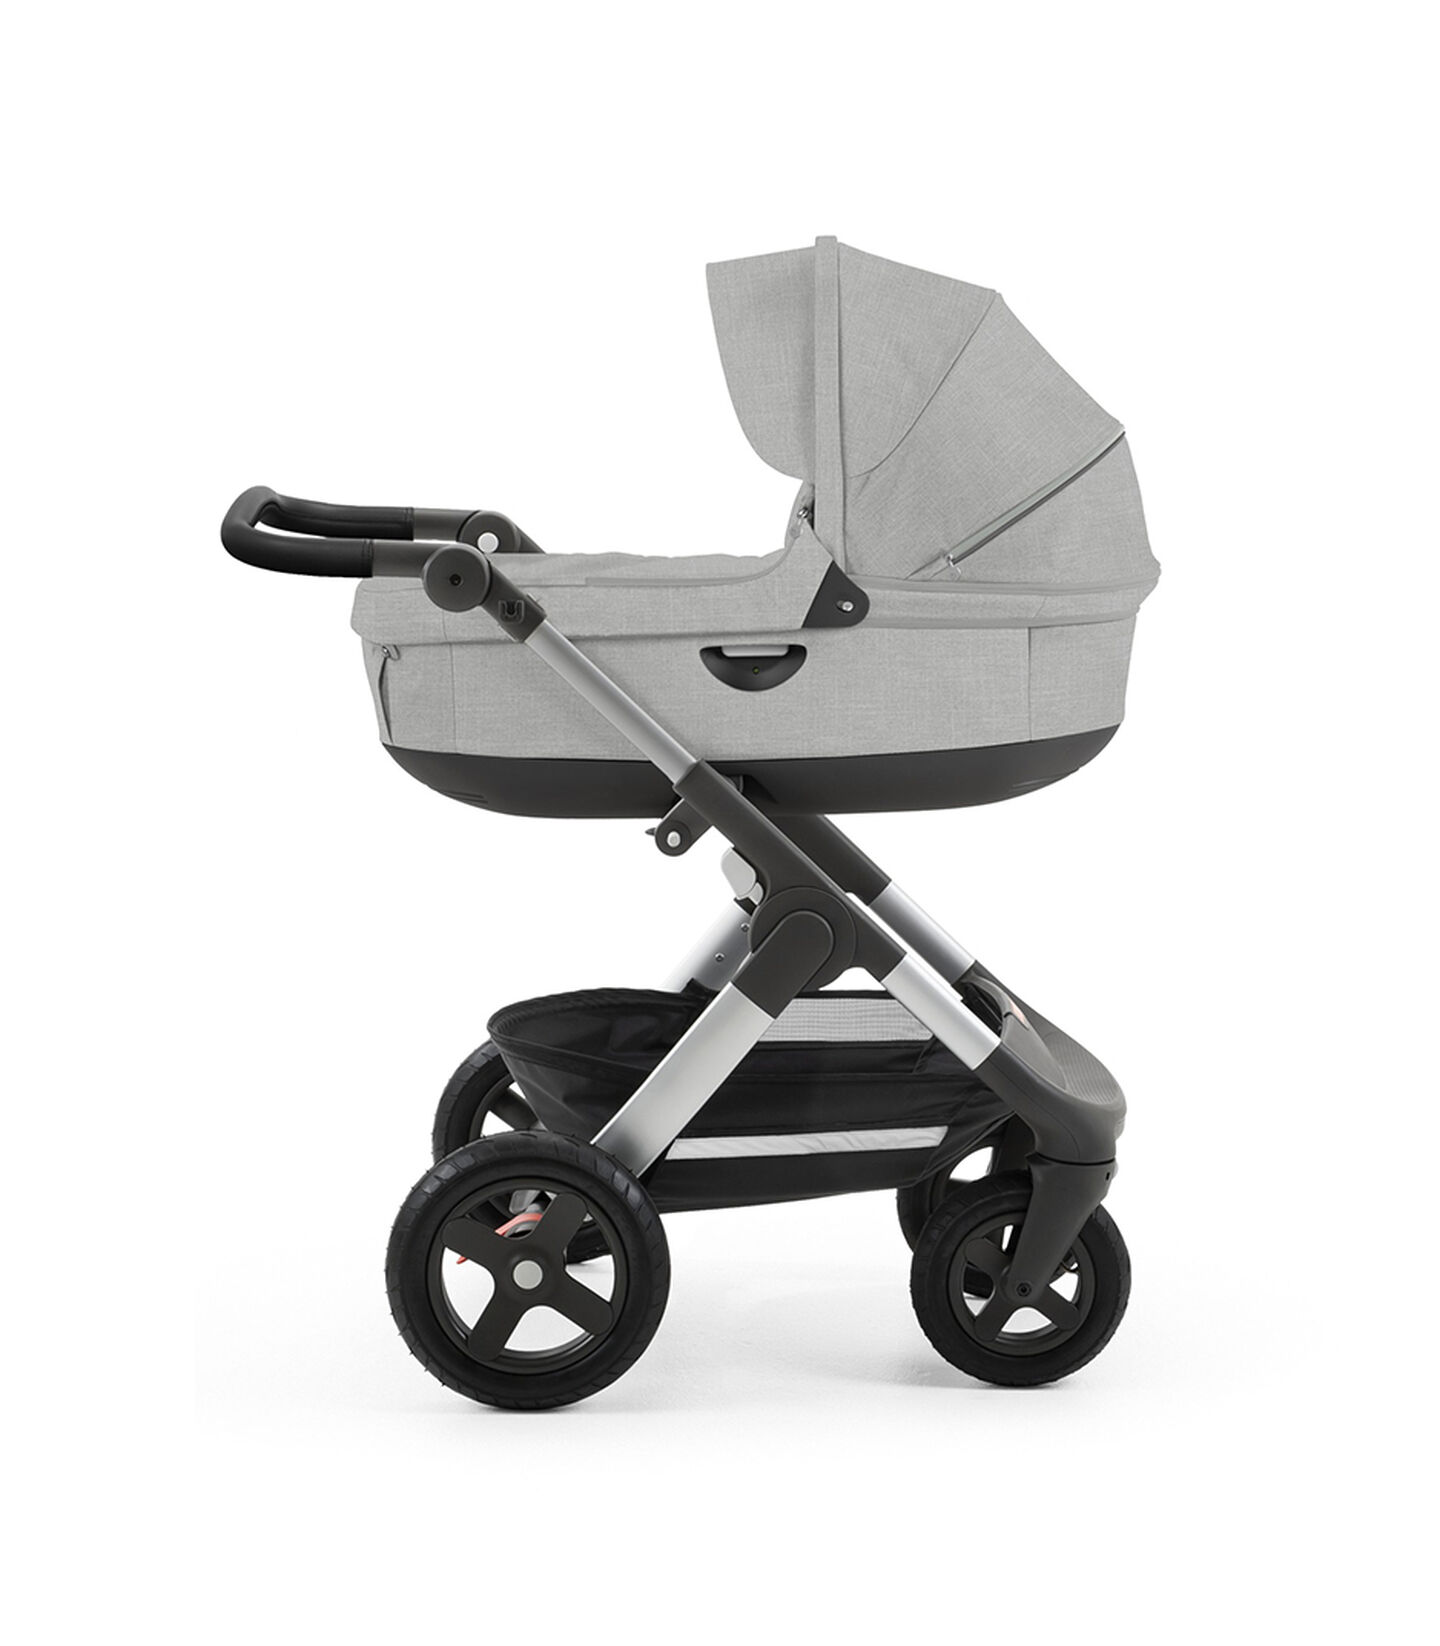 Stokke® Trailz™ with silver chassis  and Stokke® Stroller Carry Cot, Grey Melange. Leatherette Handle. view 2